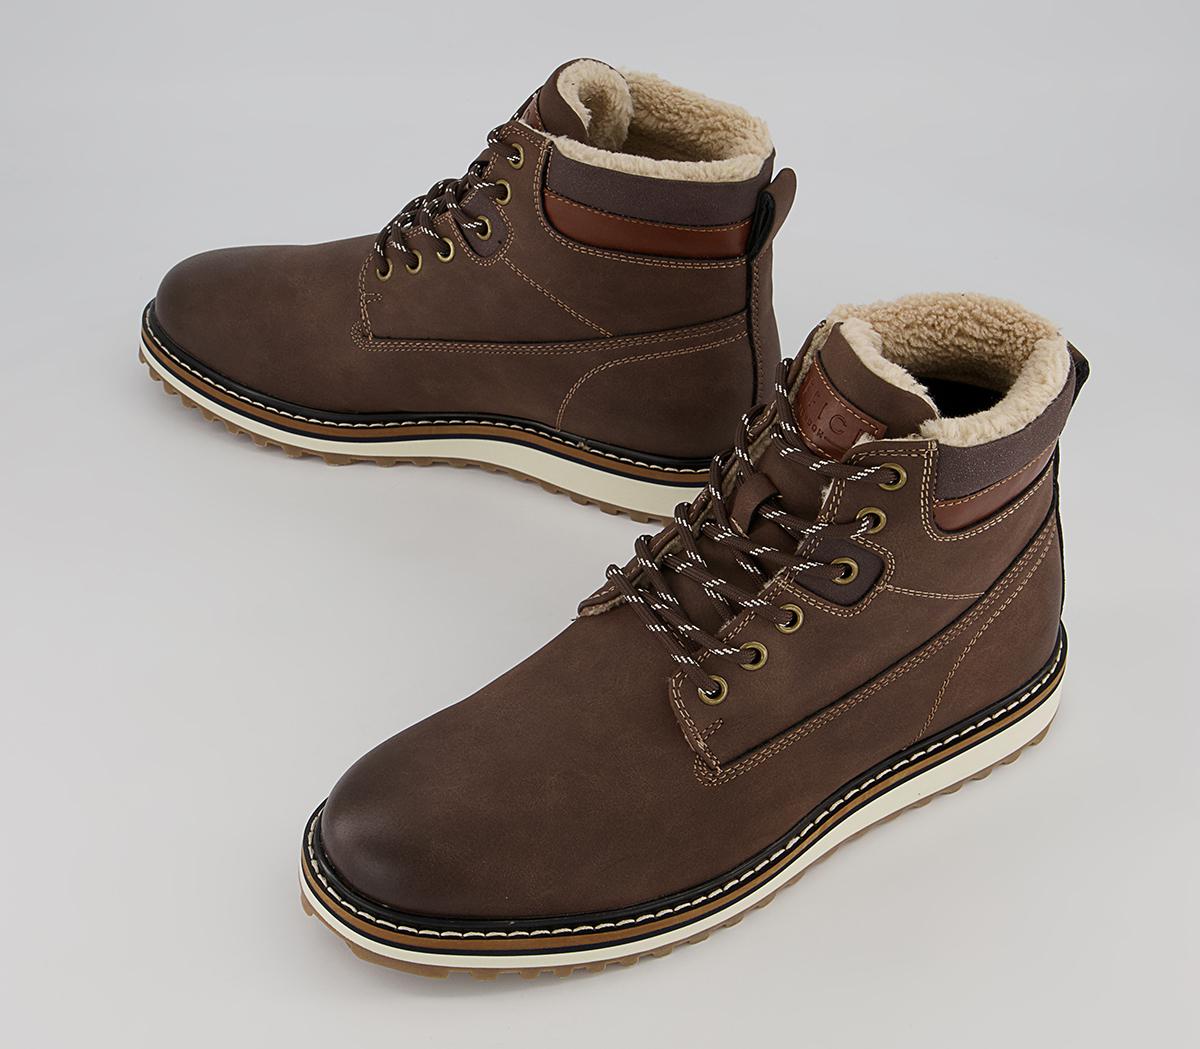 OFFICE Bodmin Borg Lined Ankle Boots Brown Nubuck - Men’s Boots